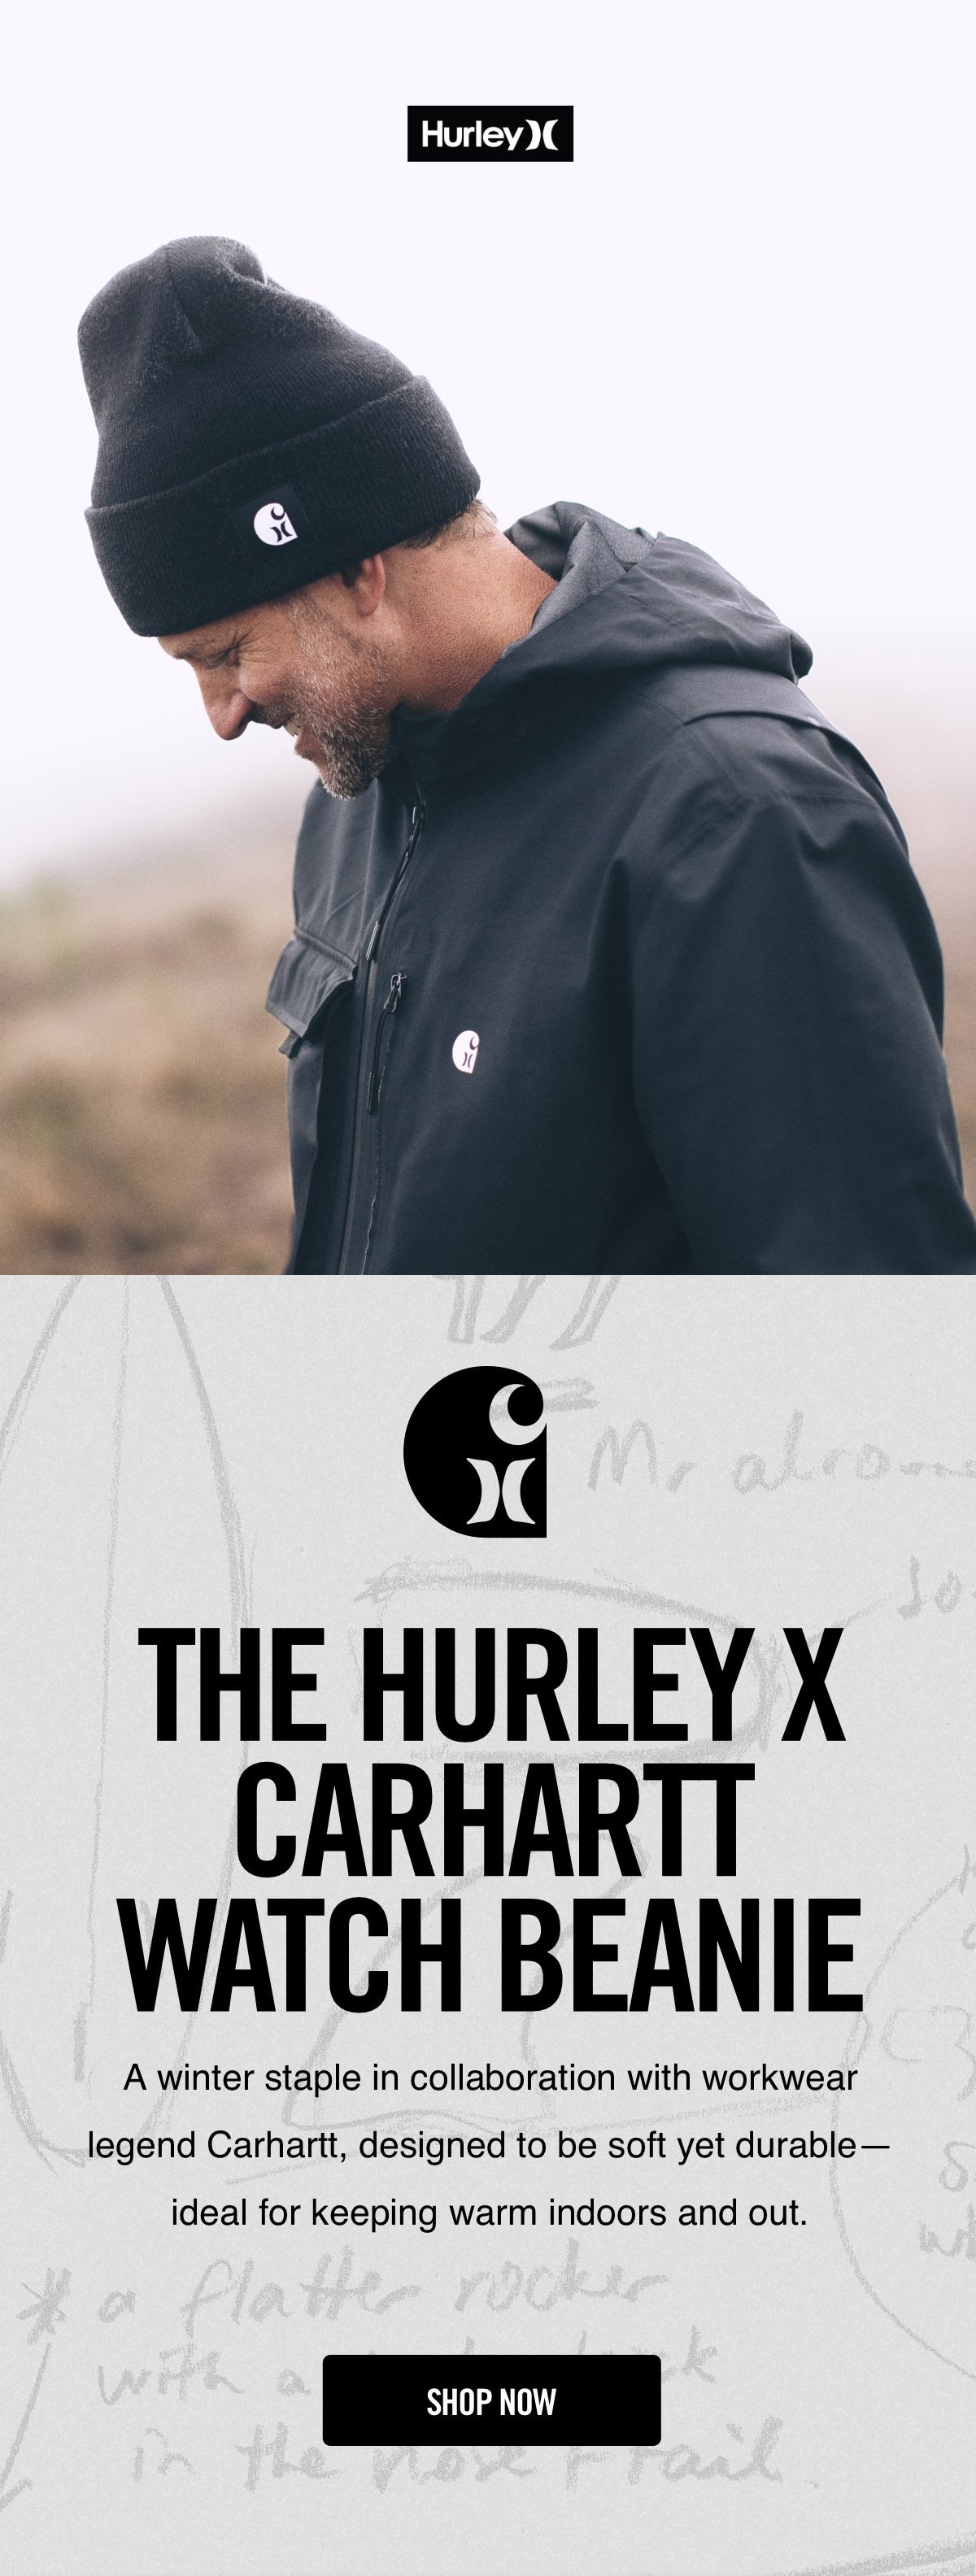 Hurley  Nike SB - Take your workout to the next level with Hurley